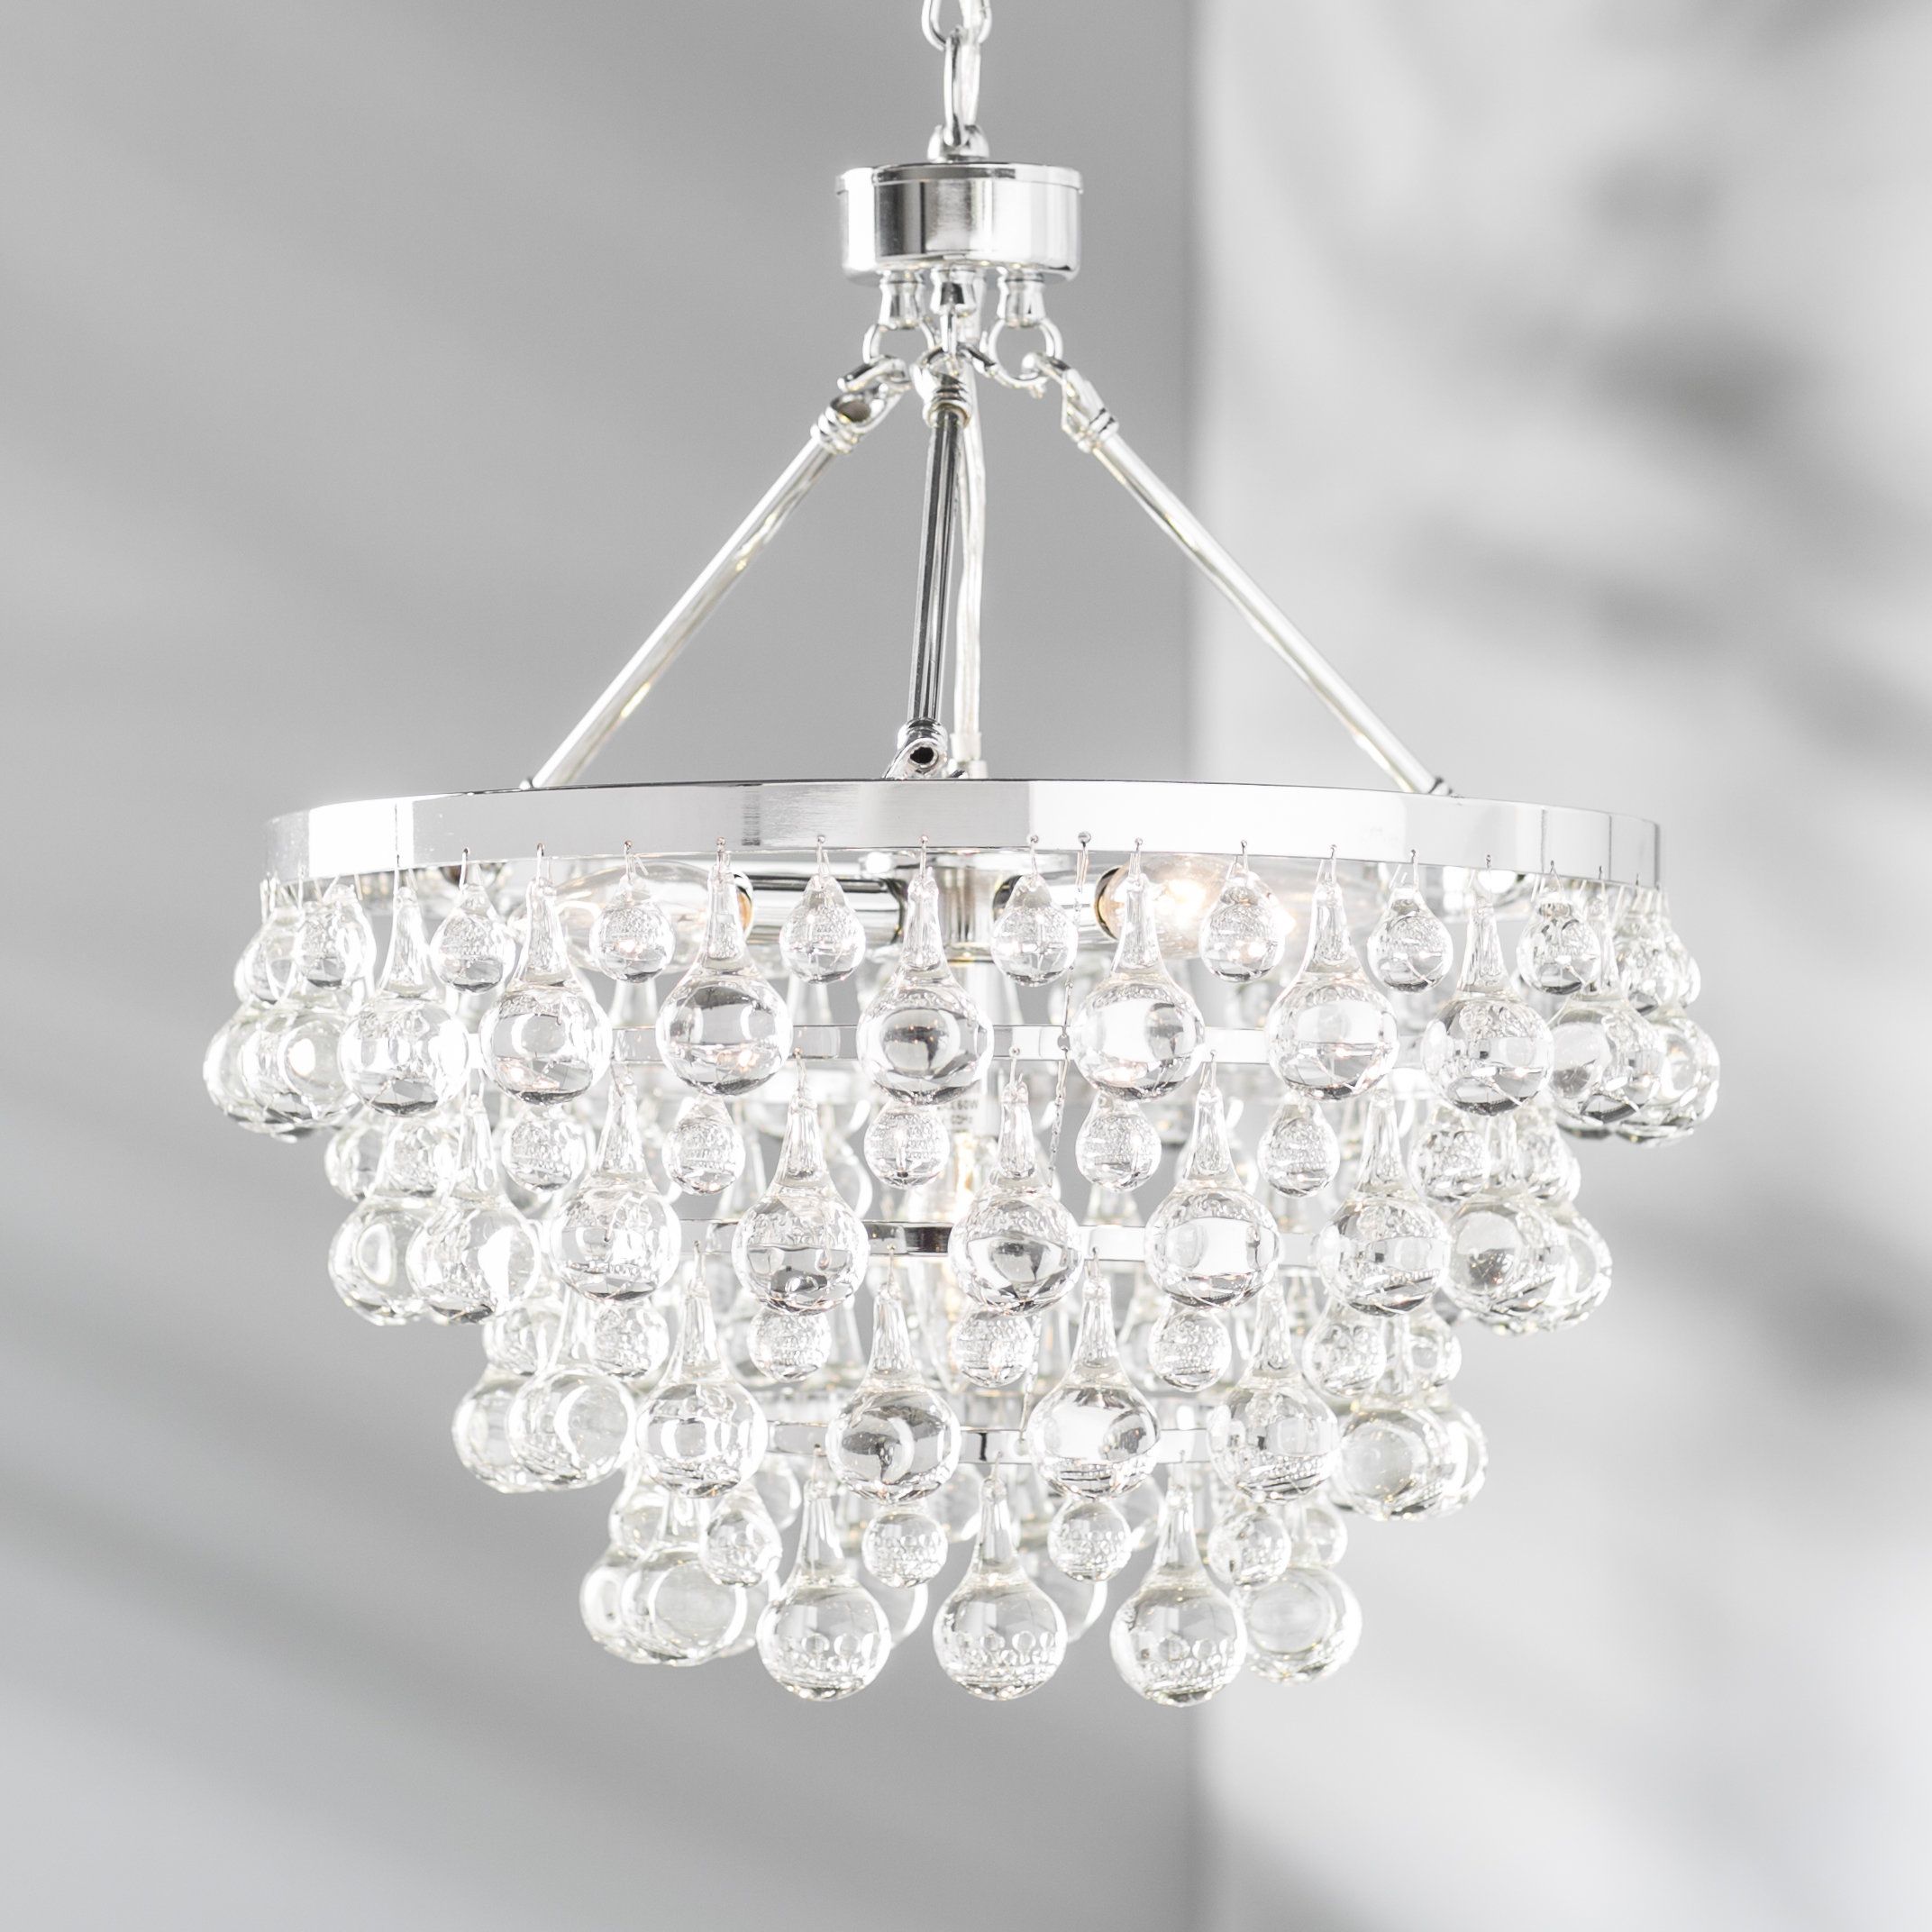 Ahern 5 Light Crystal Chandelier With Regard To Verdell 5 Light Crystal Chandeliers (View 6 of 30)